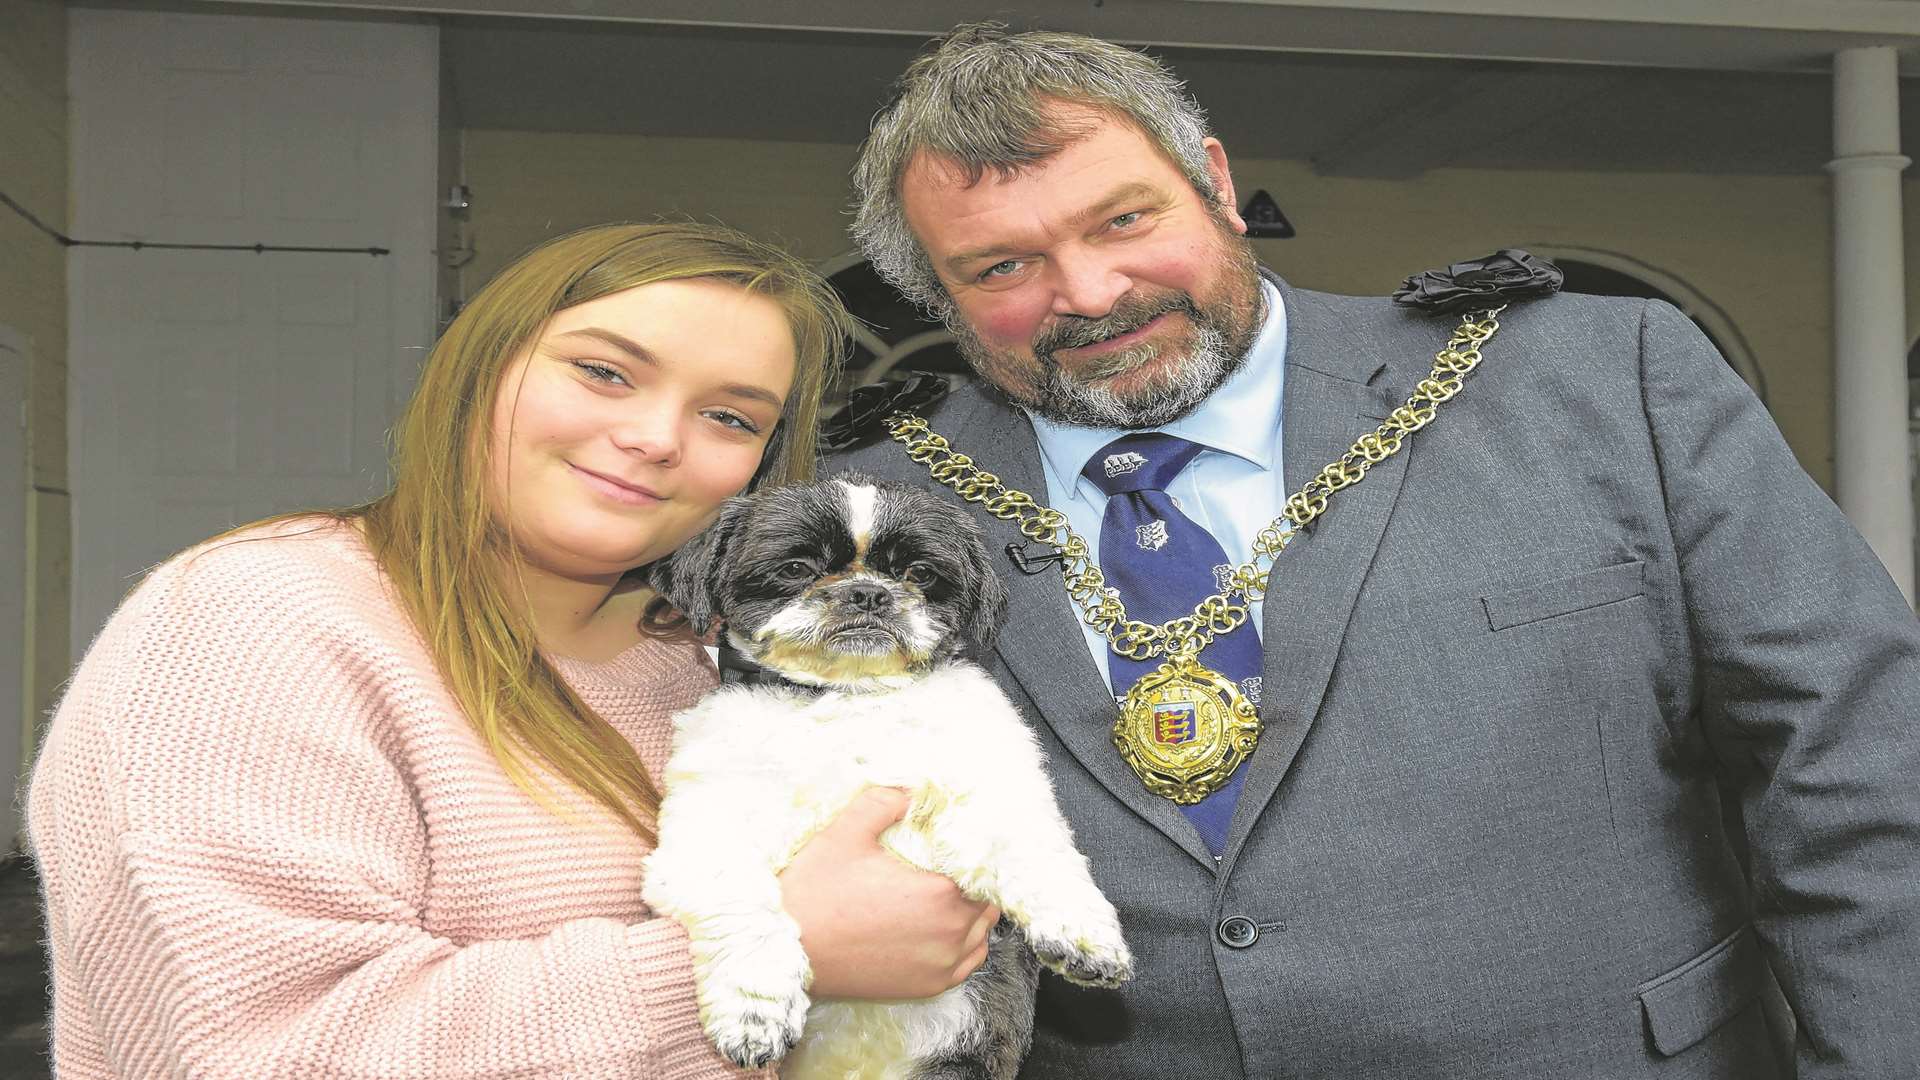 Josie and Jack met the Mayor of Deal Cllr David Cronk ahead of the competitions